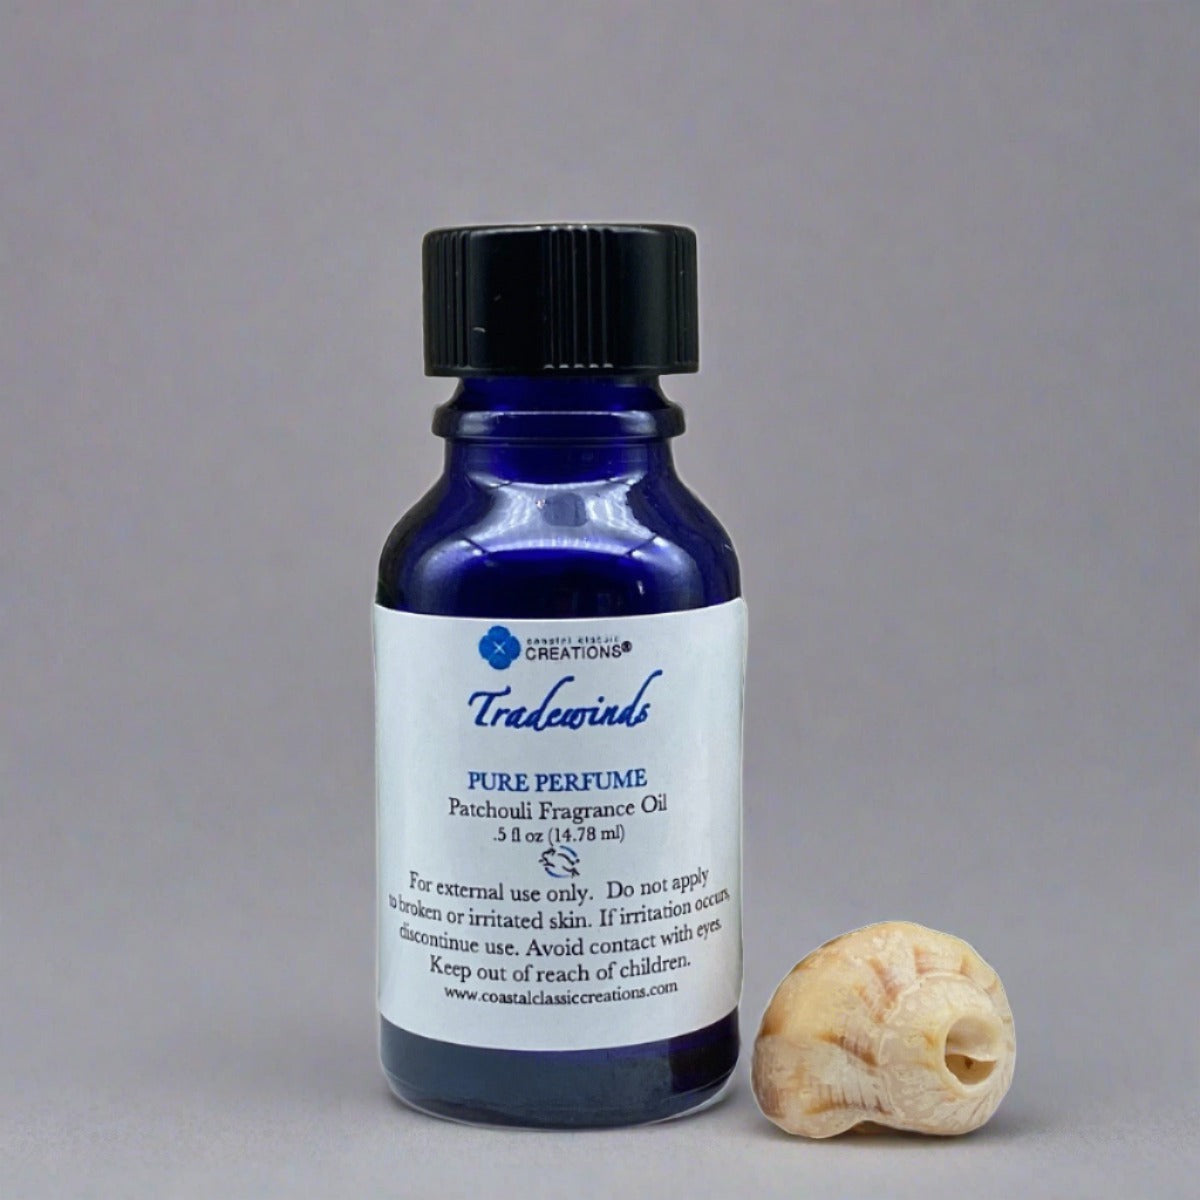 Tradewinds Perfume, a deep patchouli scent made as a reminder for mindful living